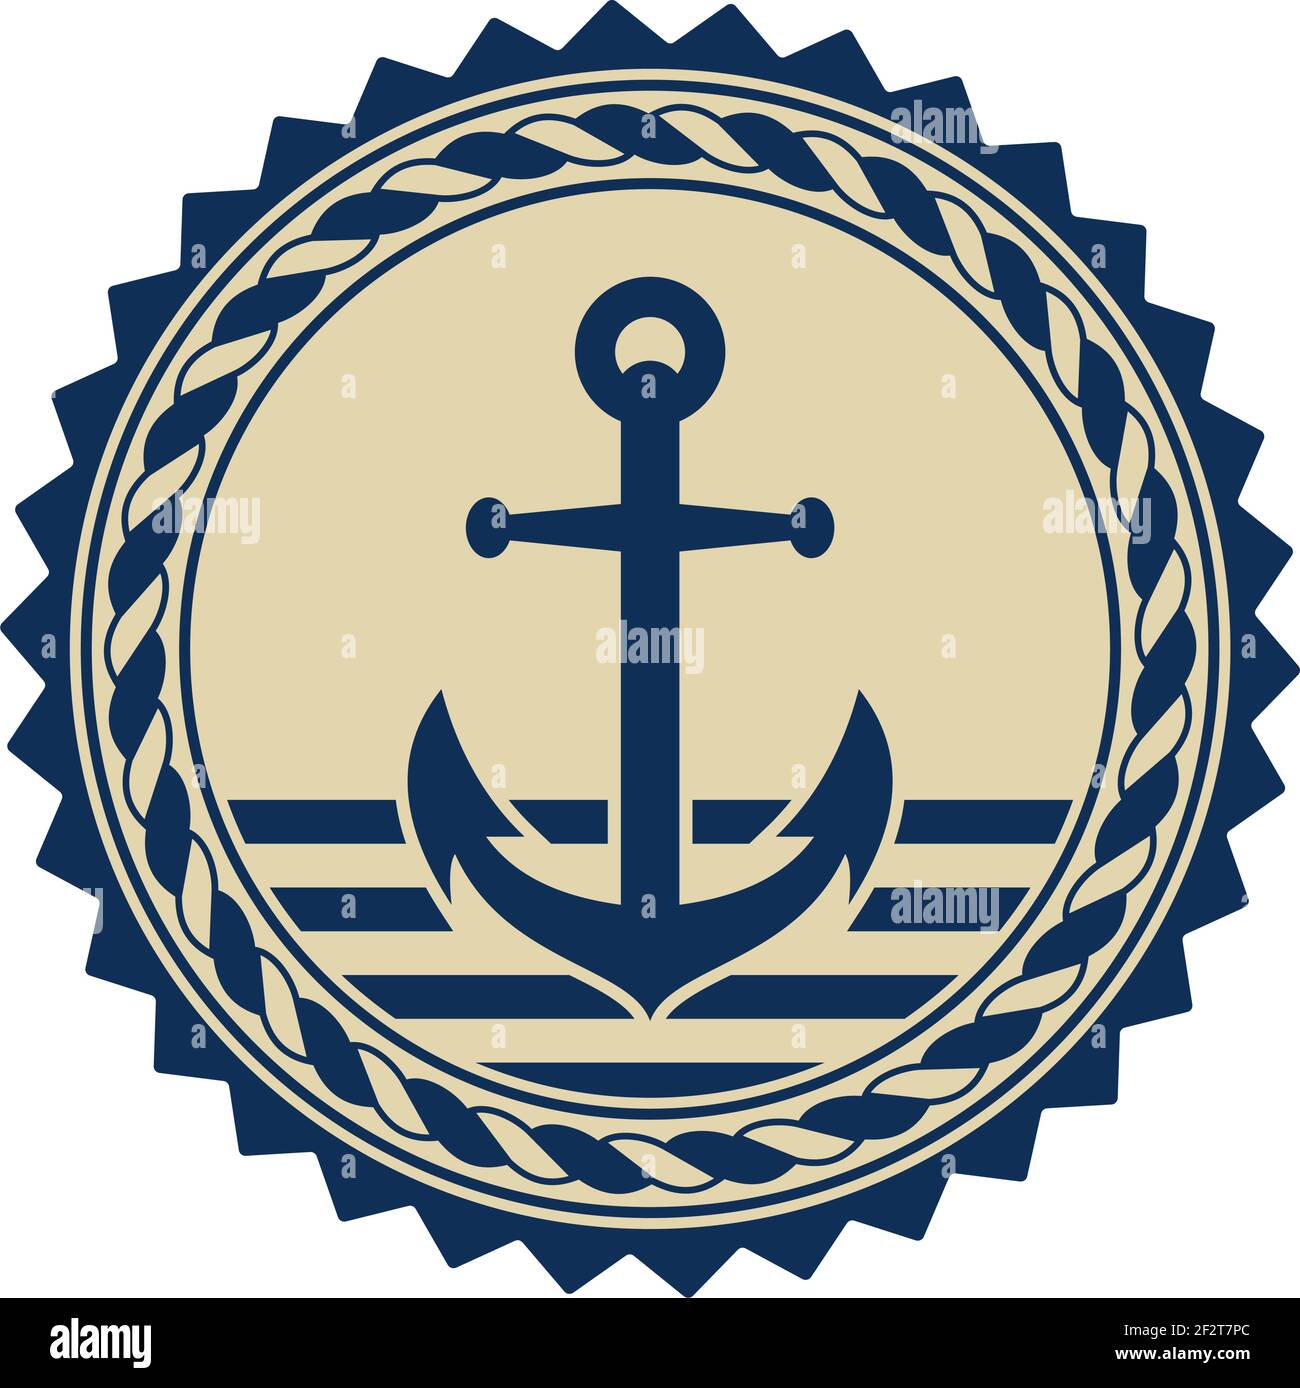 Anchor symbol vector with nautical rope in marine blue and beige